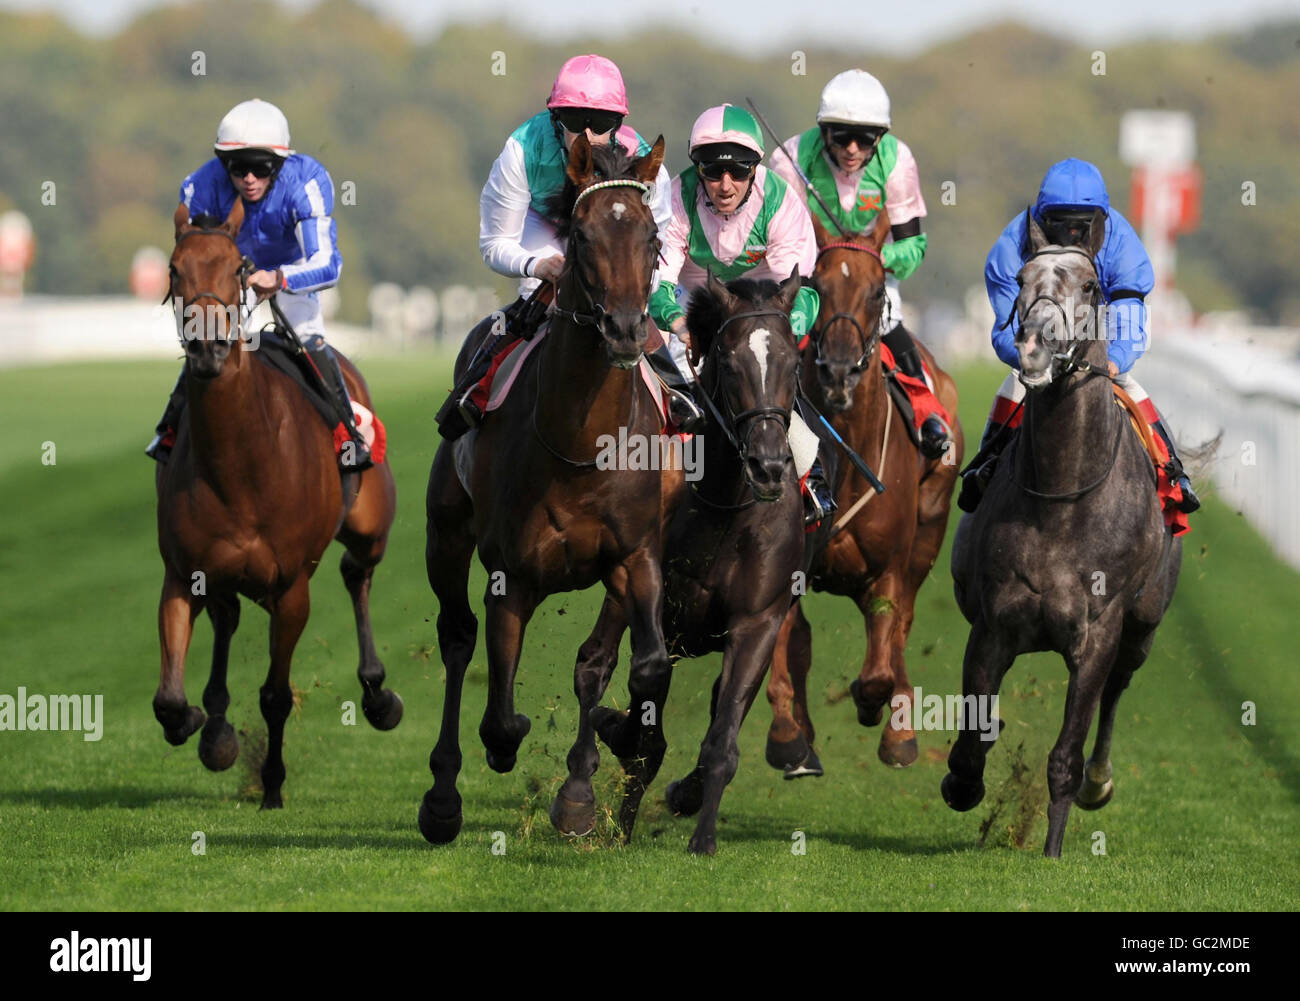 Tom Queally and Twice Over (pink cap) win the Debenhams Frenchgate Conditions Stakes during The Frenchgate 5 Raceday in the Ladbrokes St Leger Festival at Doncaster Racecourse. Stock Photo